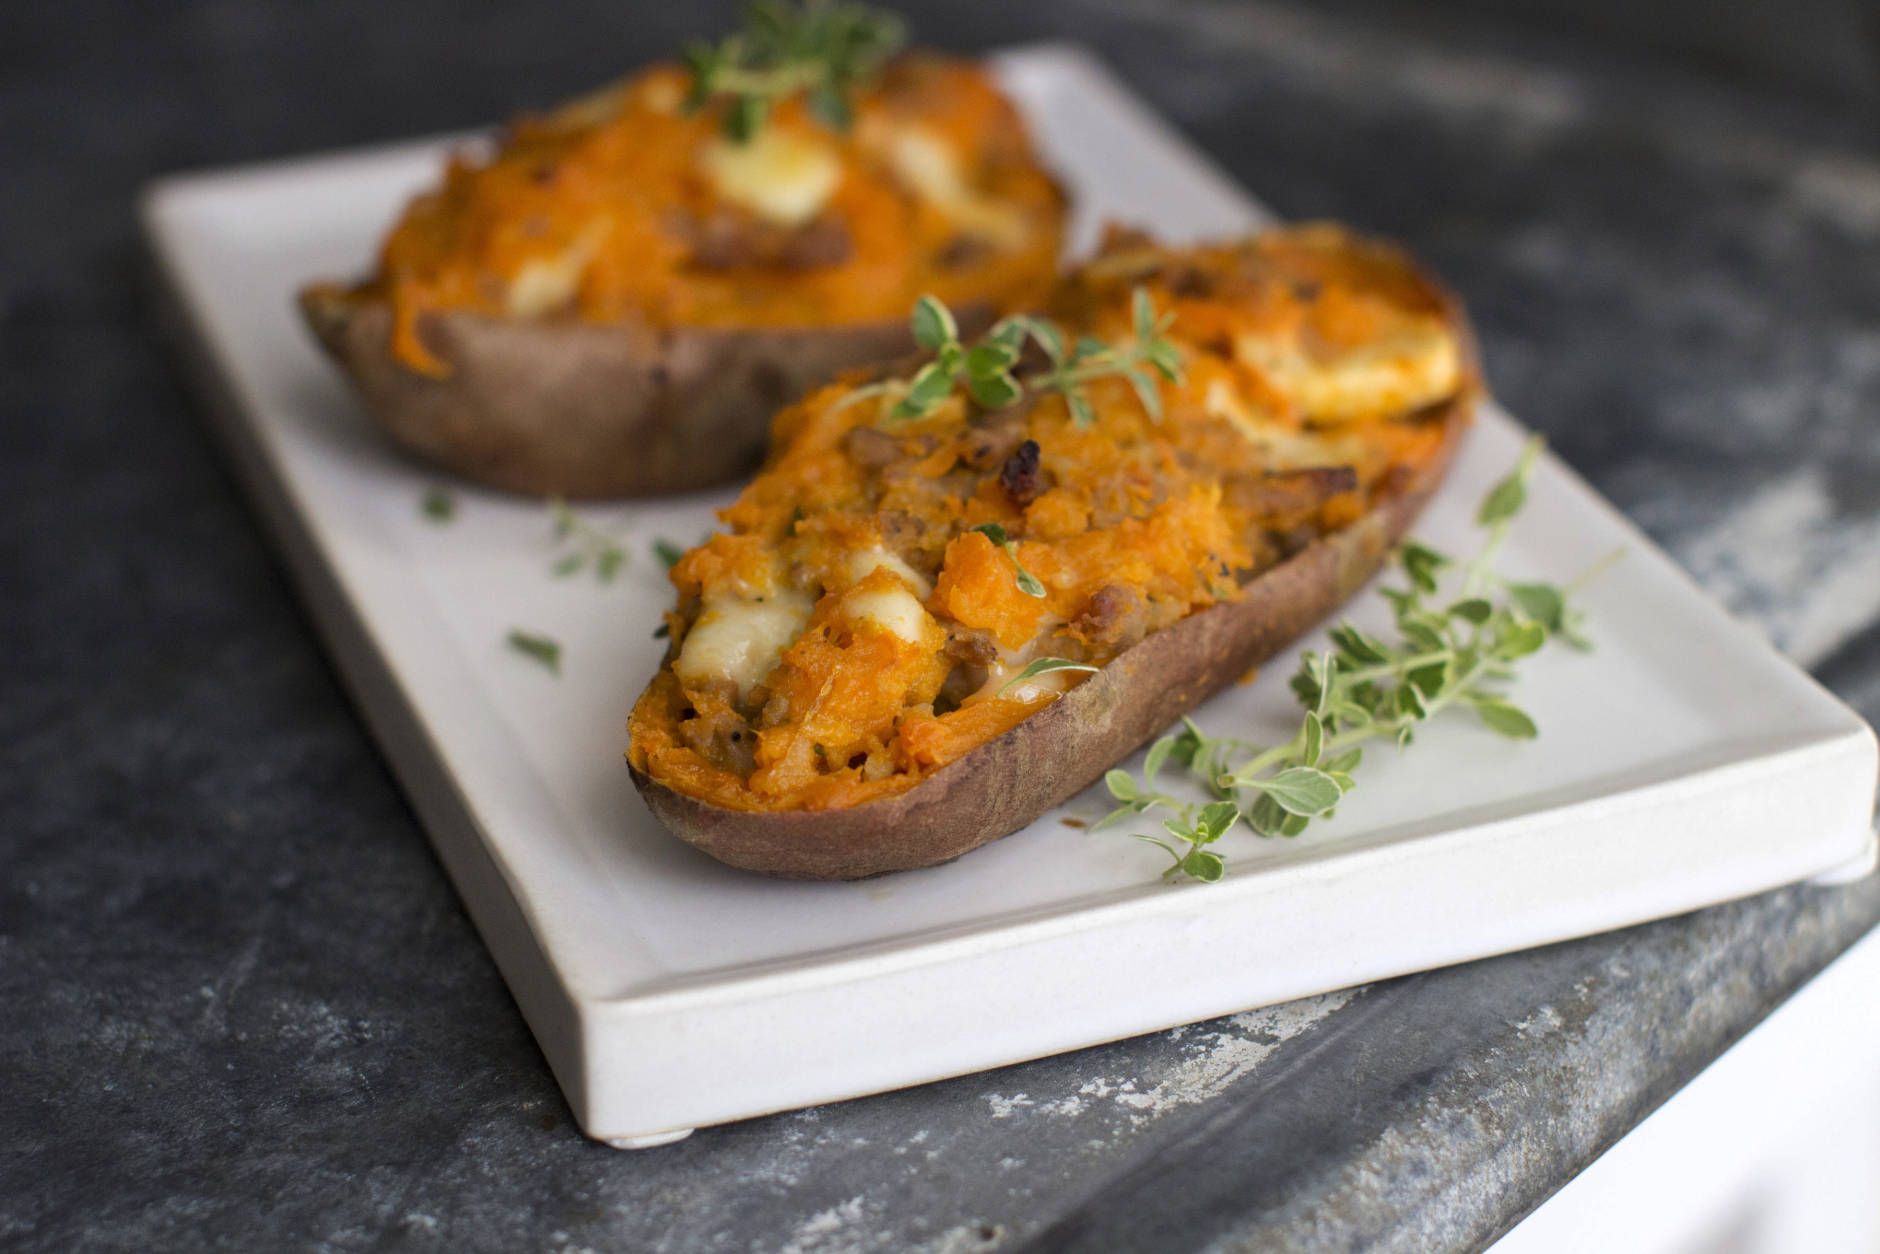 This July 28, 2014, photo shows apple-sausage stuffed twice-baked sweet potatoes in Concord, N.H. Add a bit of cheese to tie it all together and the meal takes just 20 minutes hands-on time. (AP Photo/Matthew Mead)